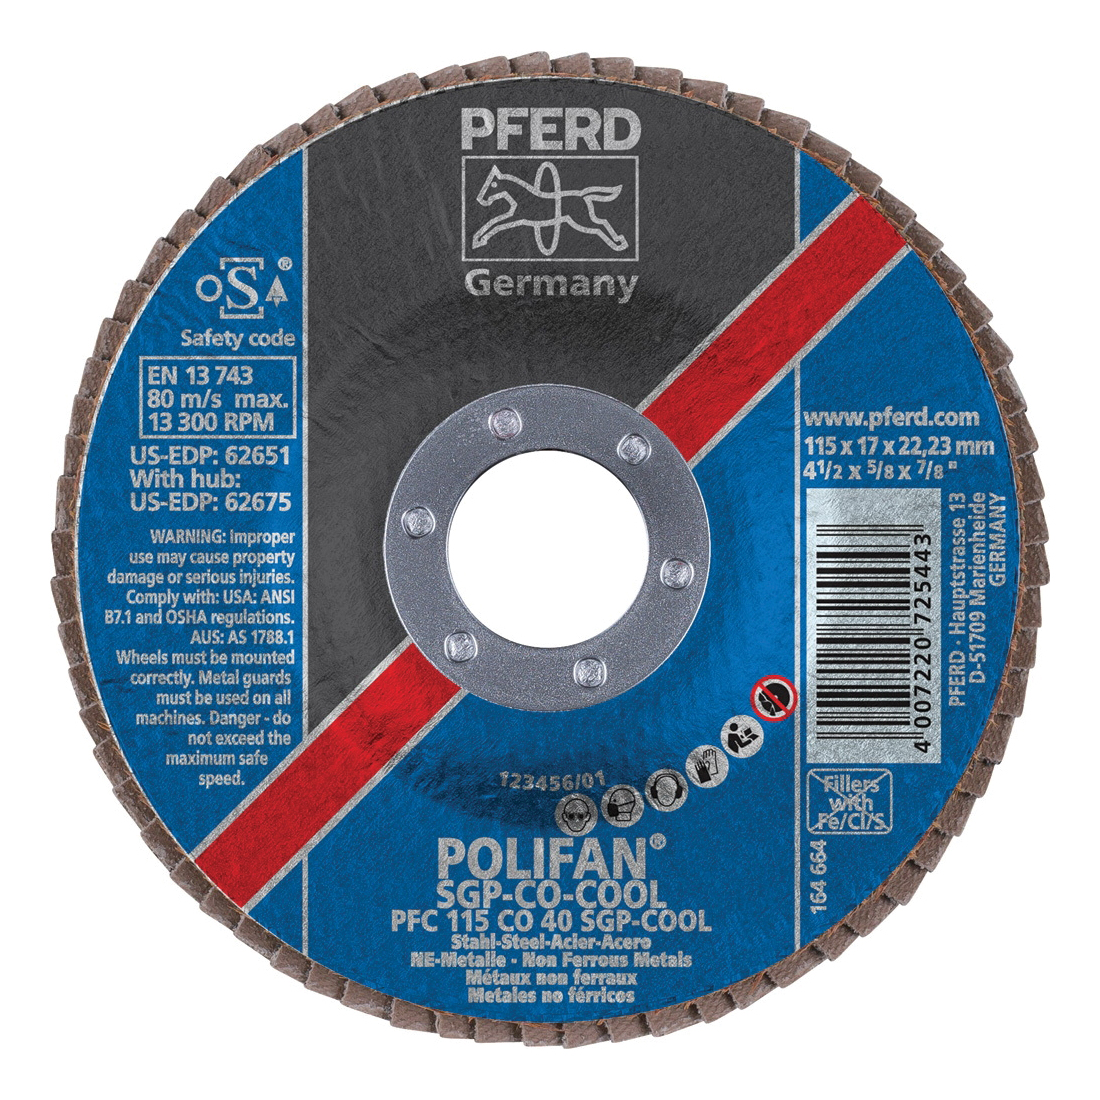 PFERD Polifan® 62651 Special Line SGP CO-COOL Unthreaded Coated Abrasive Flap Disc, 4-1/2 in Dia, 7/8 in Center Hole, 40 Grit, Ceramic Oxide Abrasive, Type 29 Conical Disc